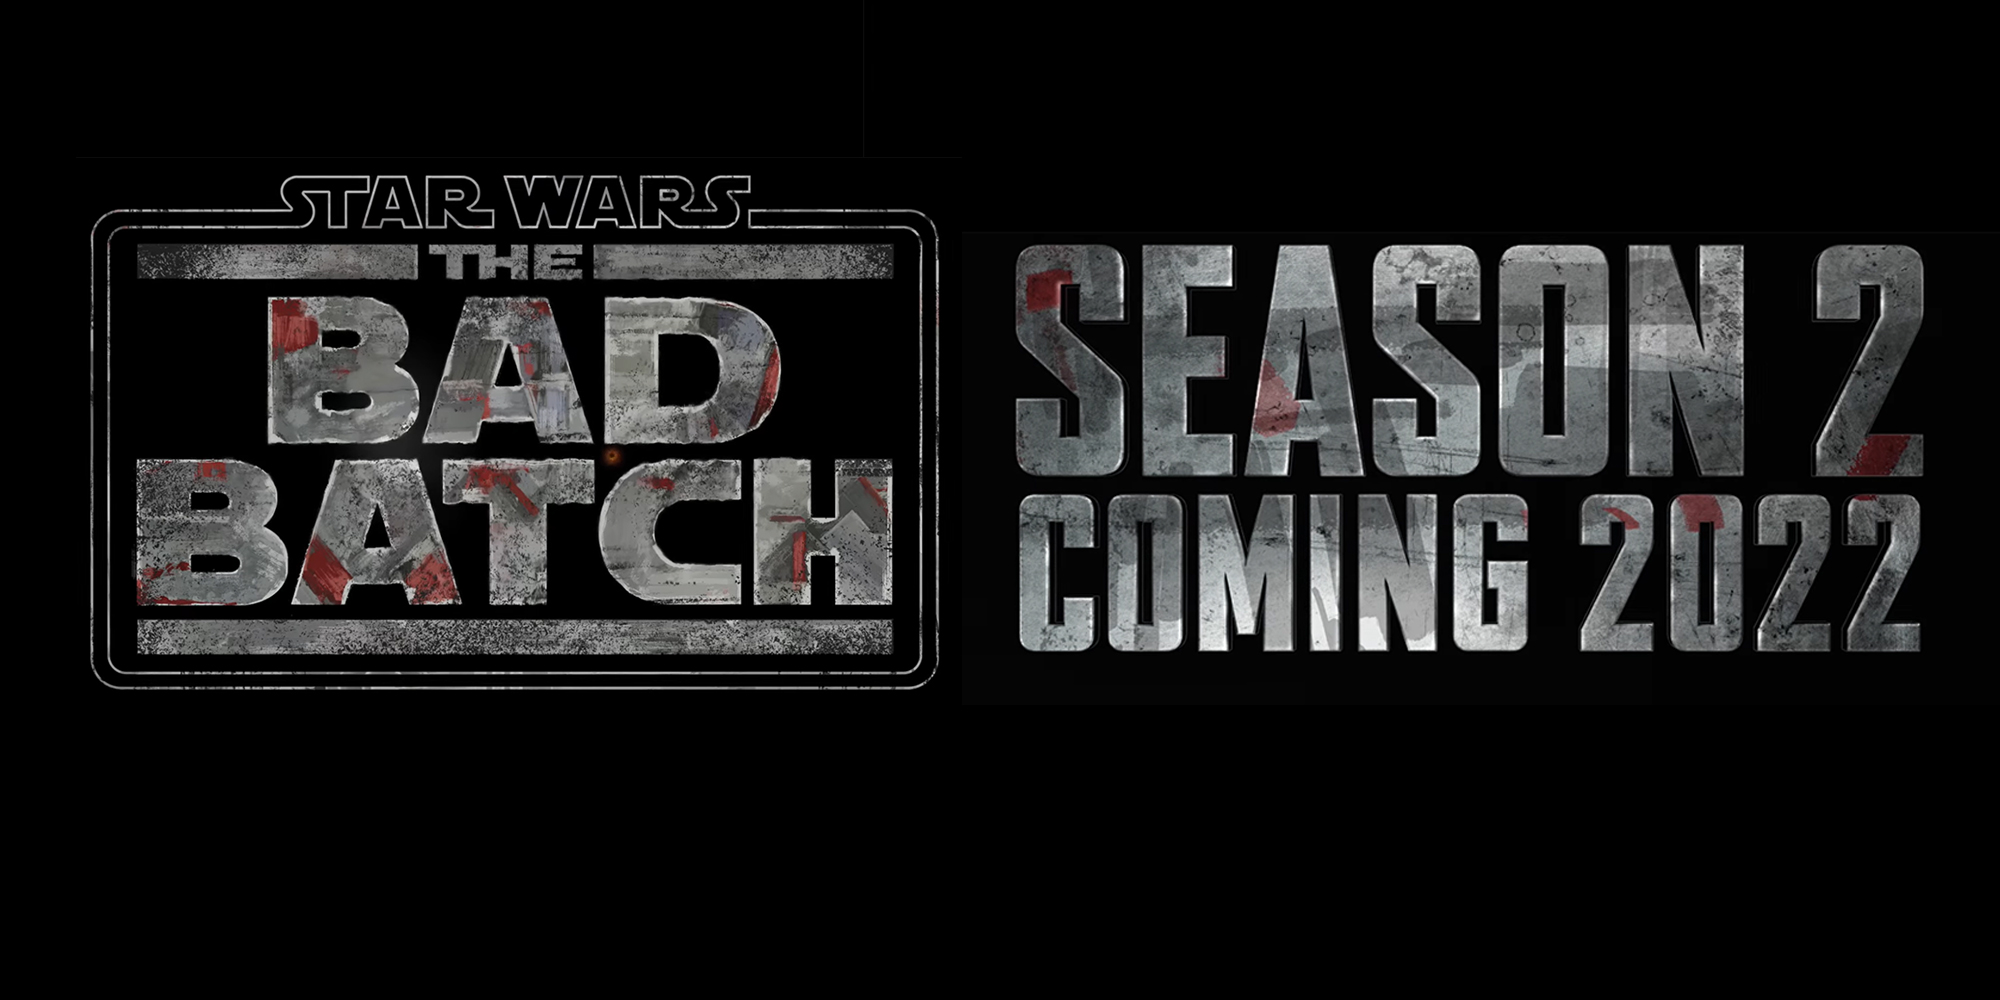 Star Wars: The Bad Batch Was Renewed For A Second Season